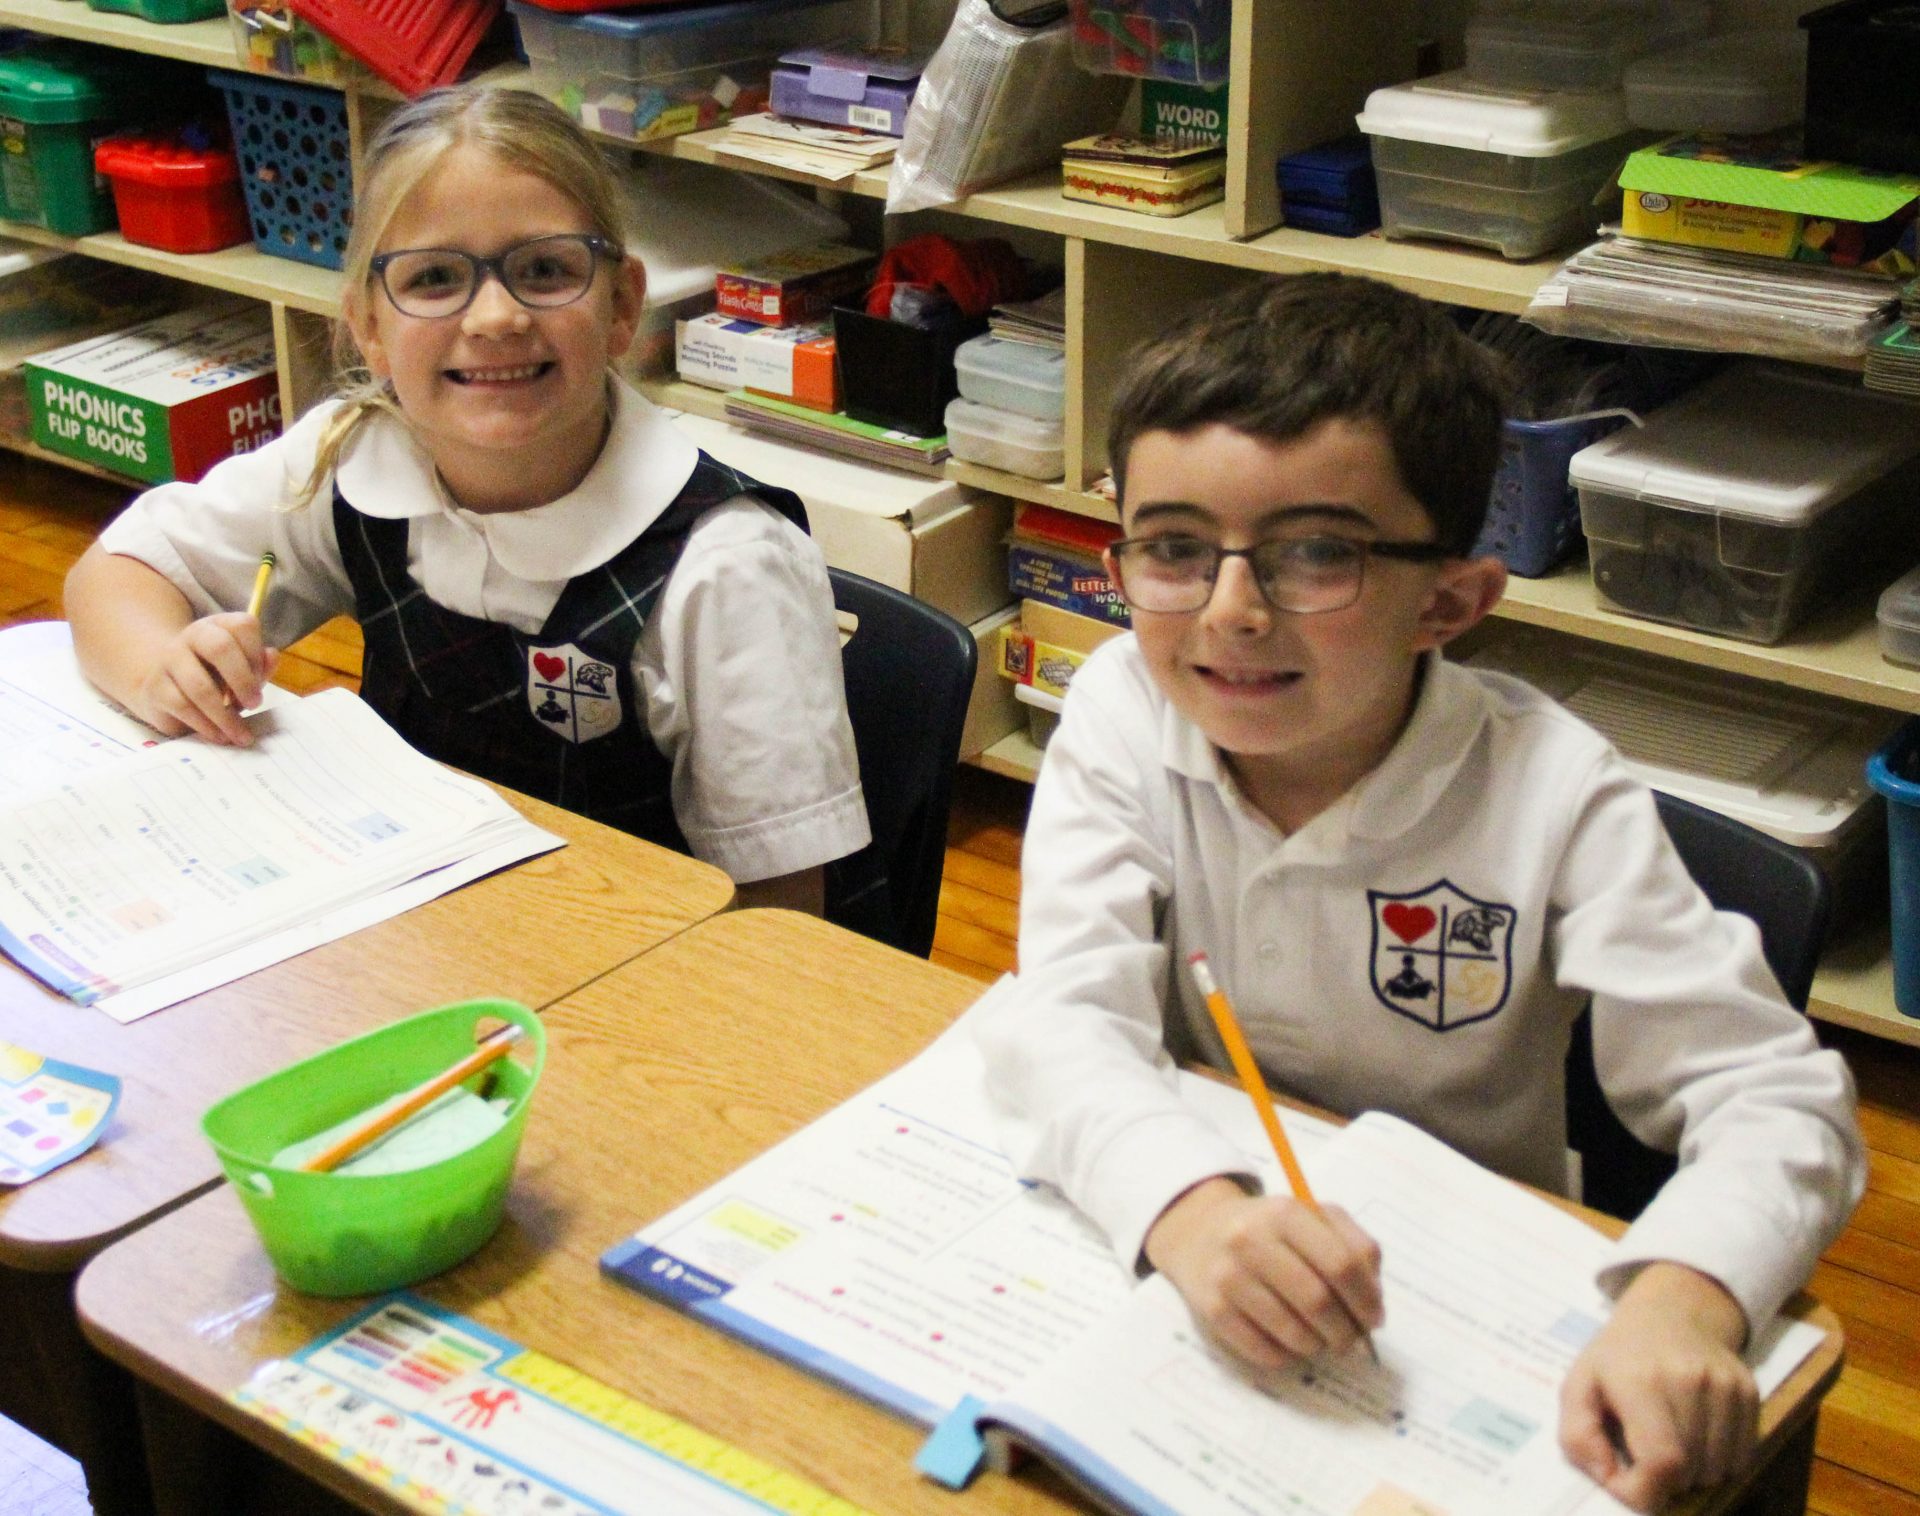 Two students sitting at their desks